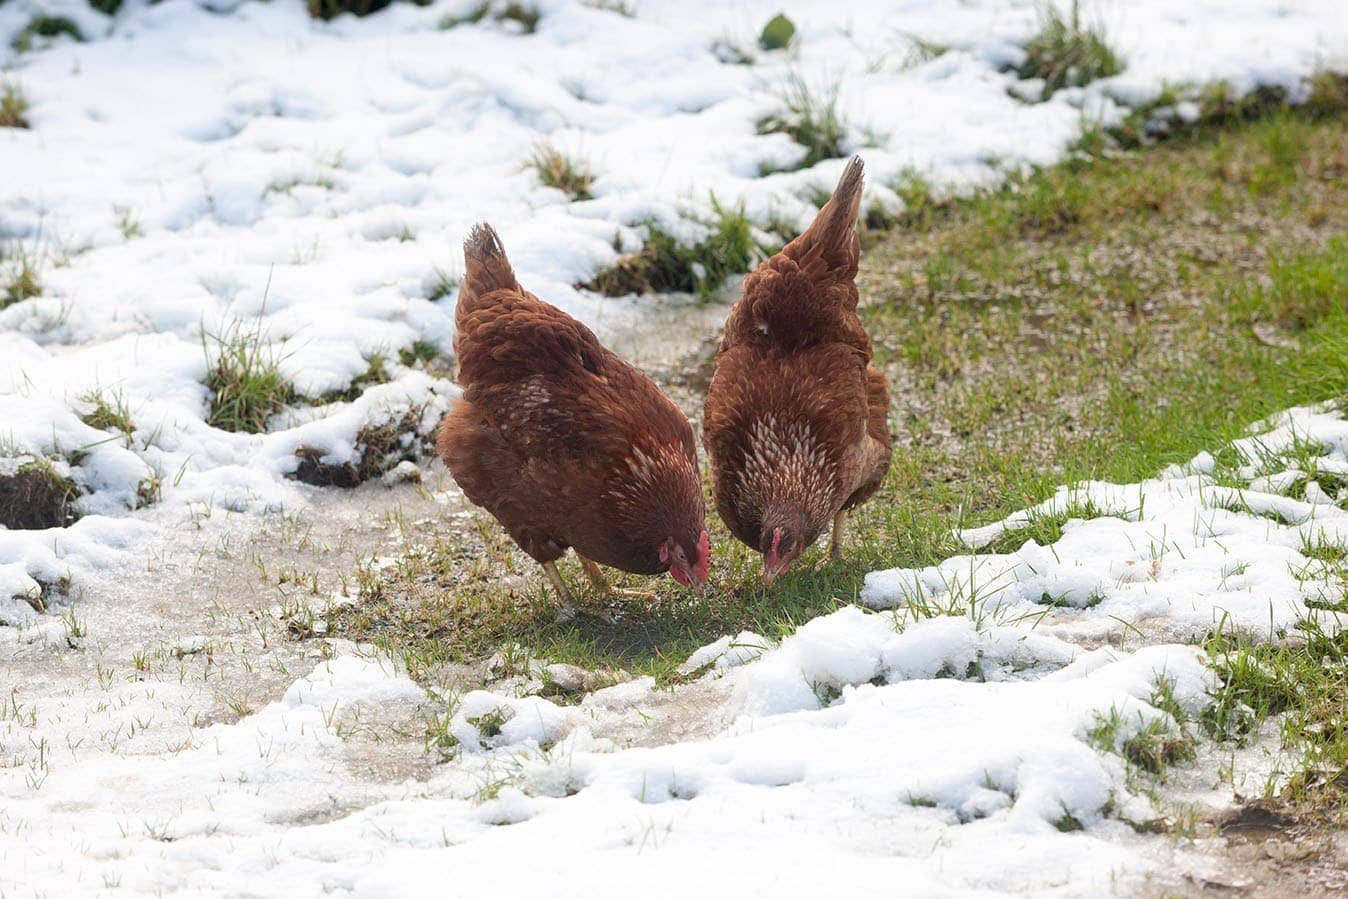 Rhode Island Red hens in the snow